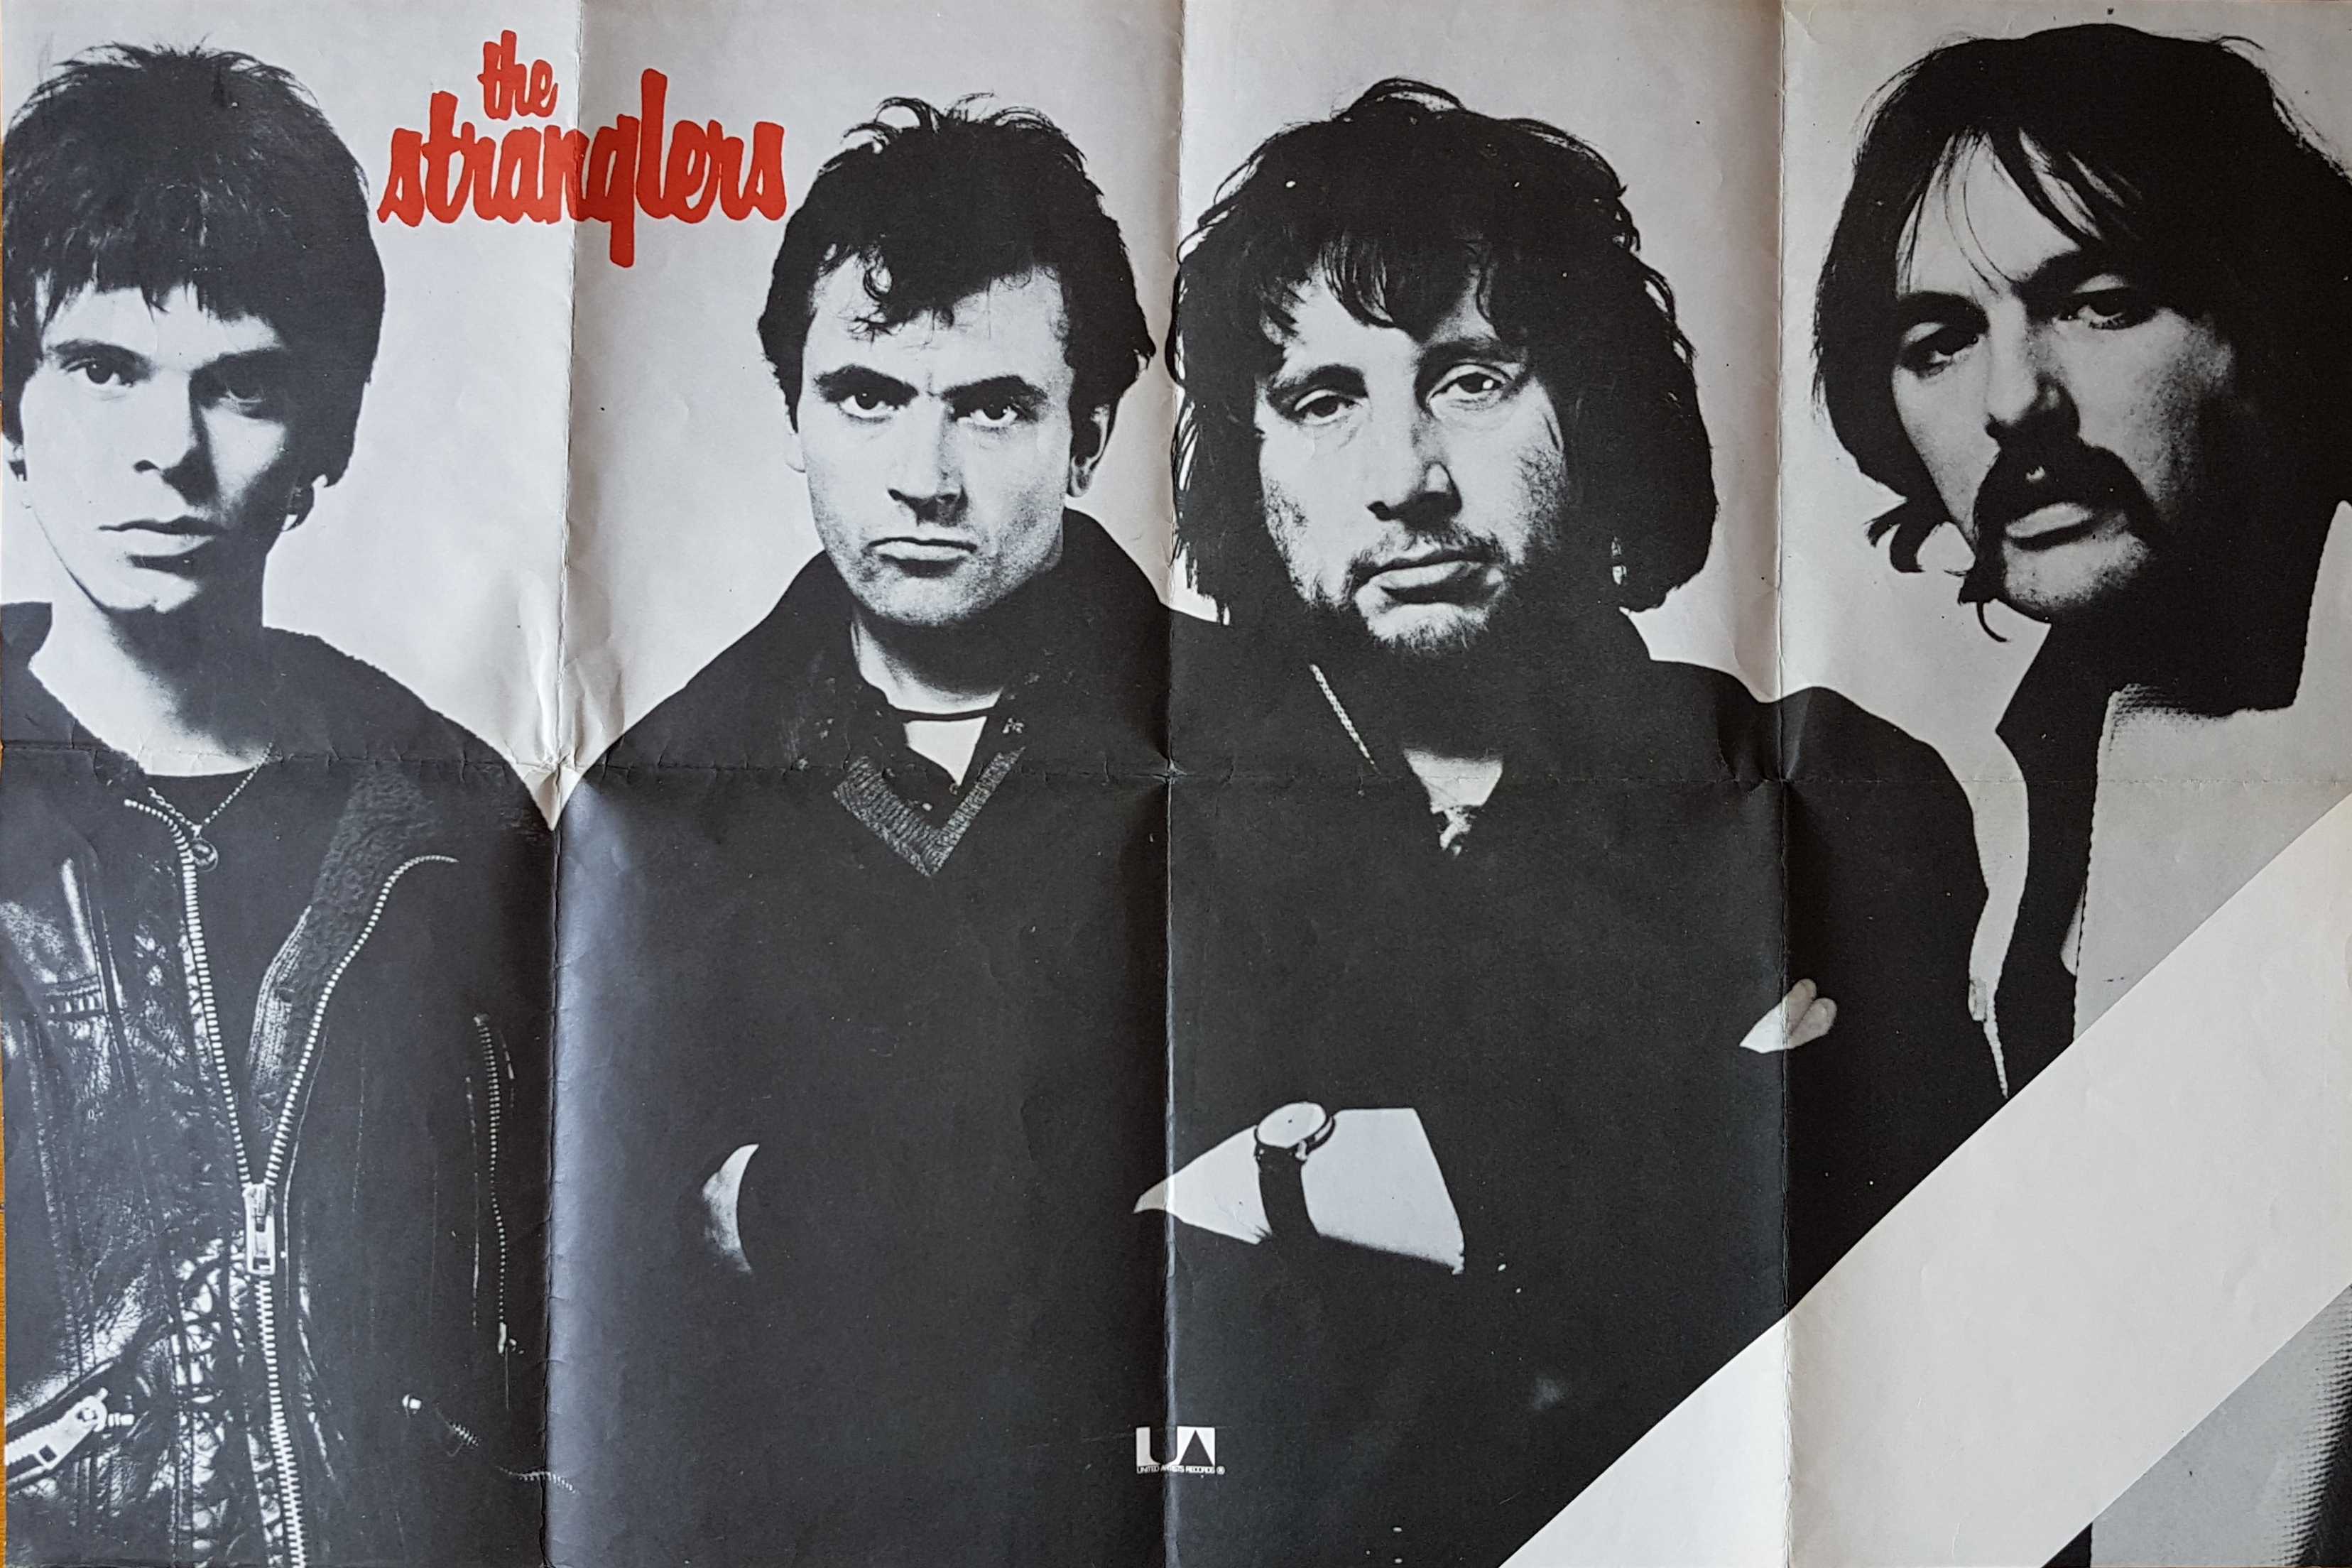 Picture of 'Rattus era' by artist The Stranglers  from The Stranglers posters